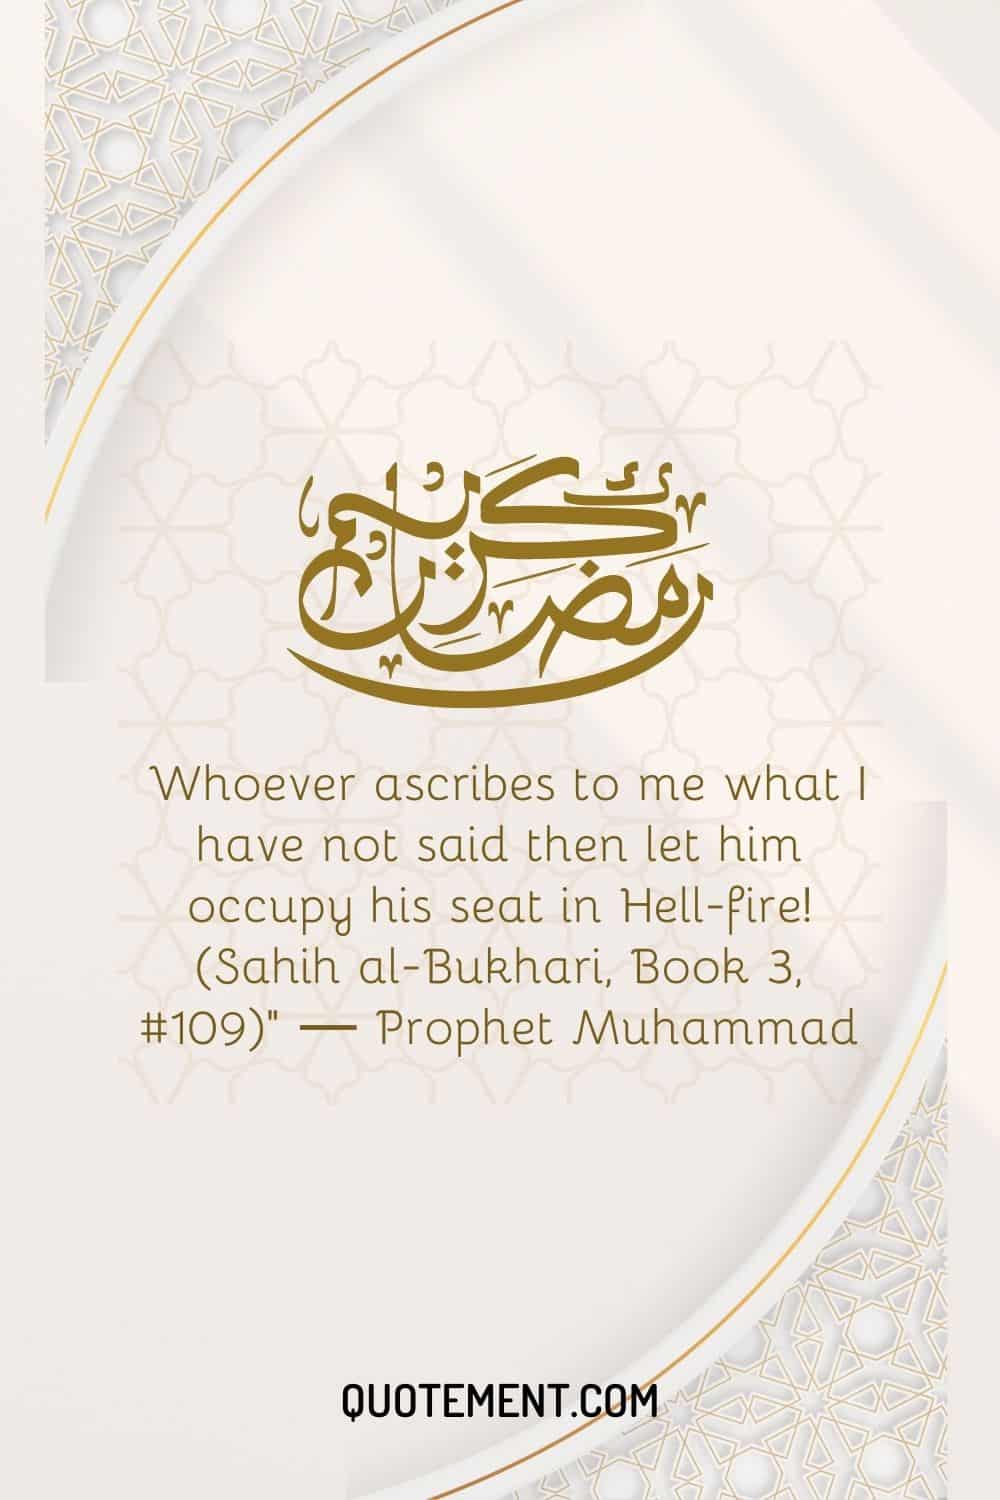 Whoever ascribes to me what I have not said then let him occupy his seat in Hell-fire (2)